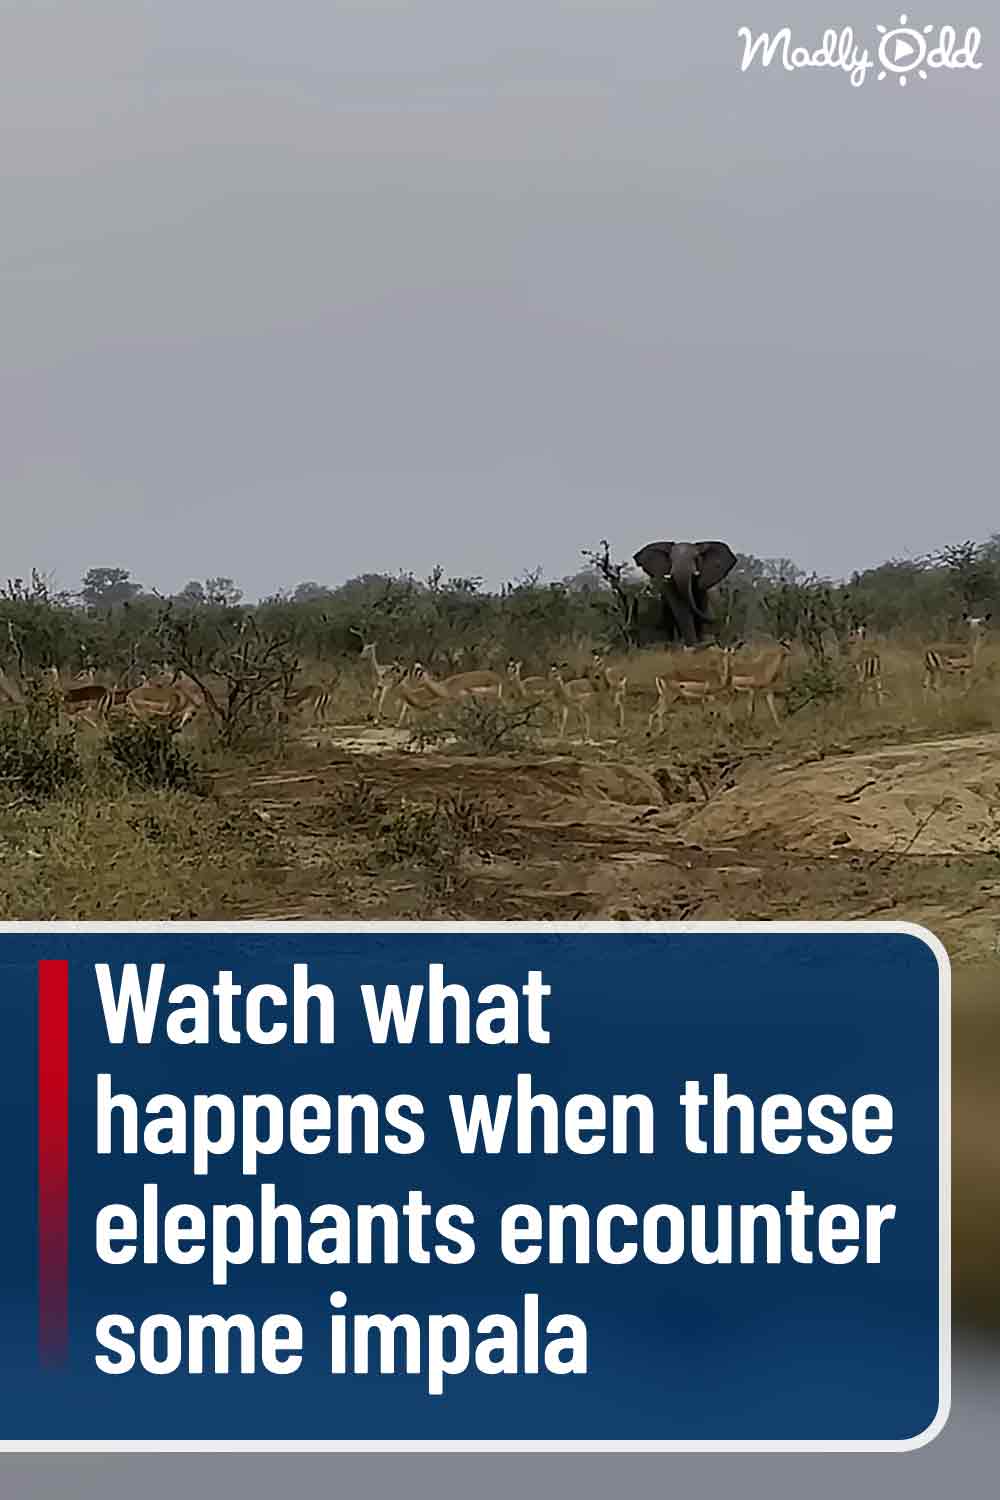 Watch what happens when these elephants encounter some impala